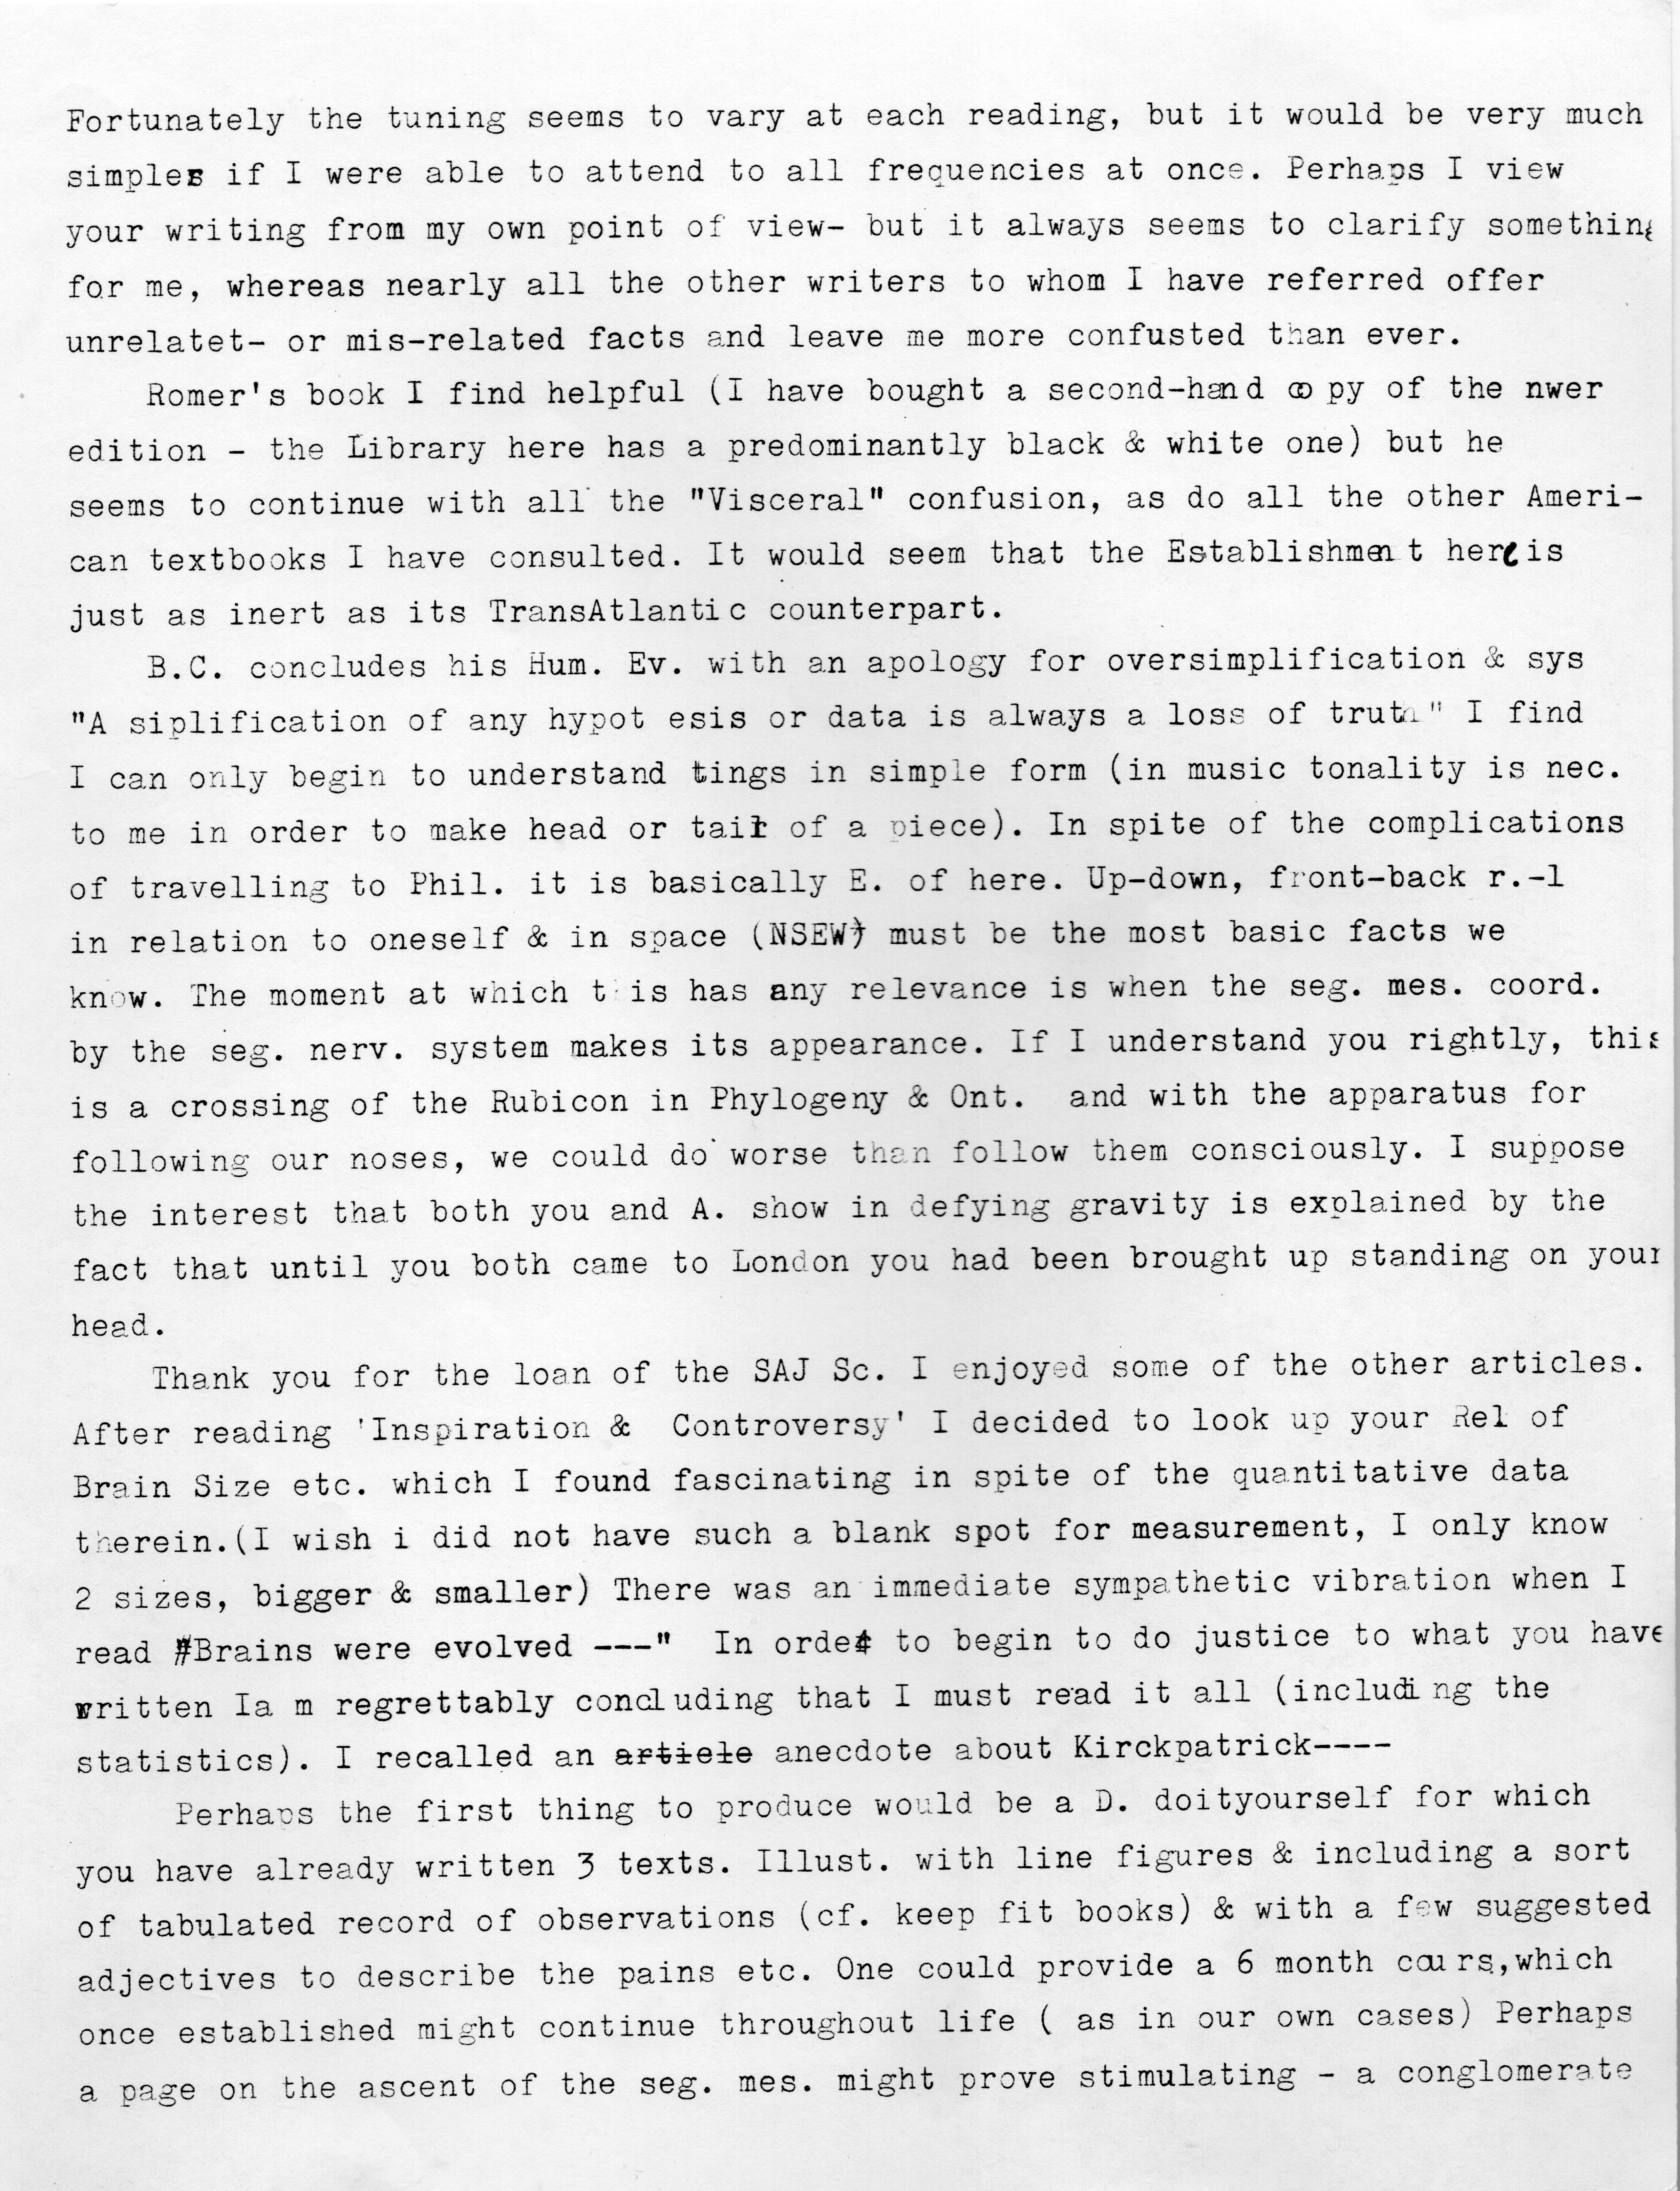 Page 3 of Murray letter to Dart. Dec. 13, 1969